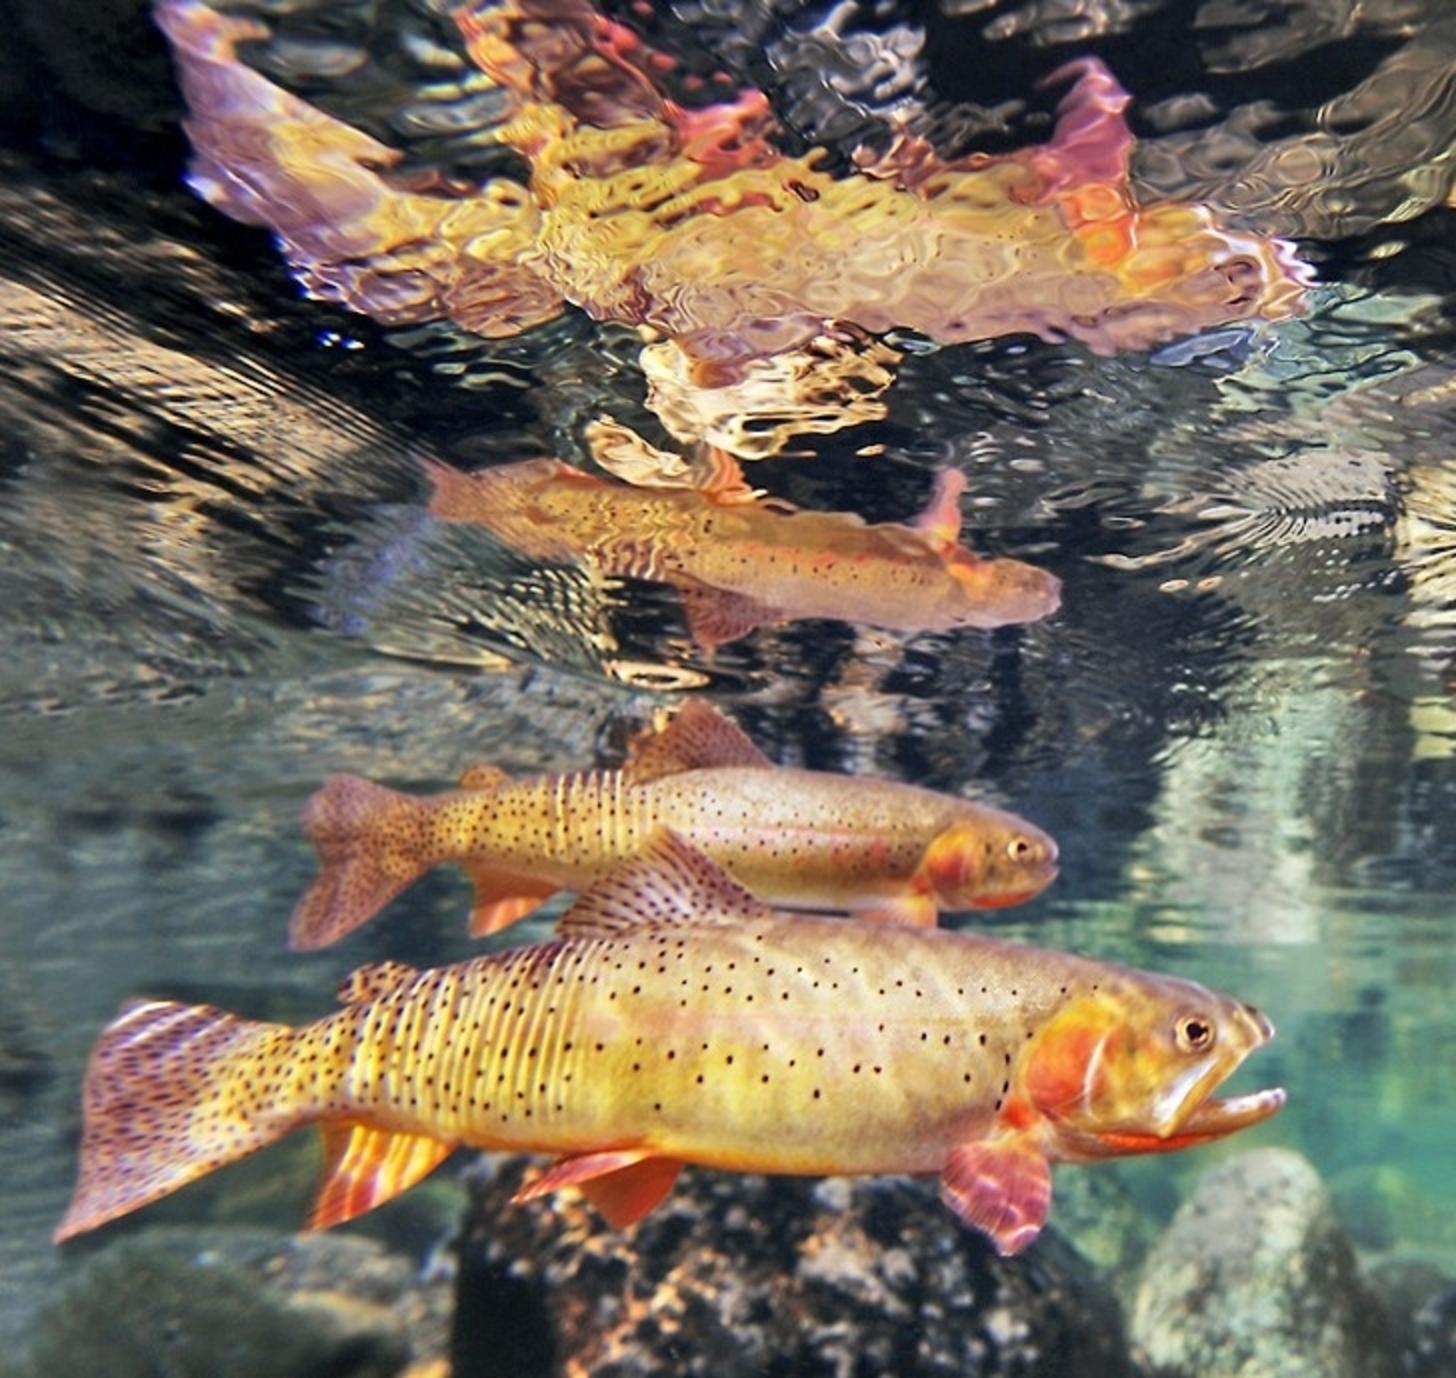 Yellowstone cutthroat trout, famous around the world, and swimming here in the national park they are named after. Photo courtesy Pat Clayton